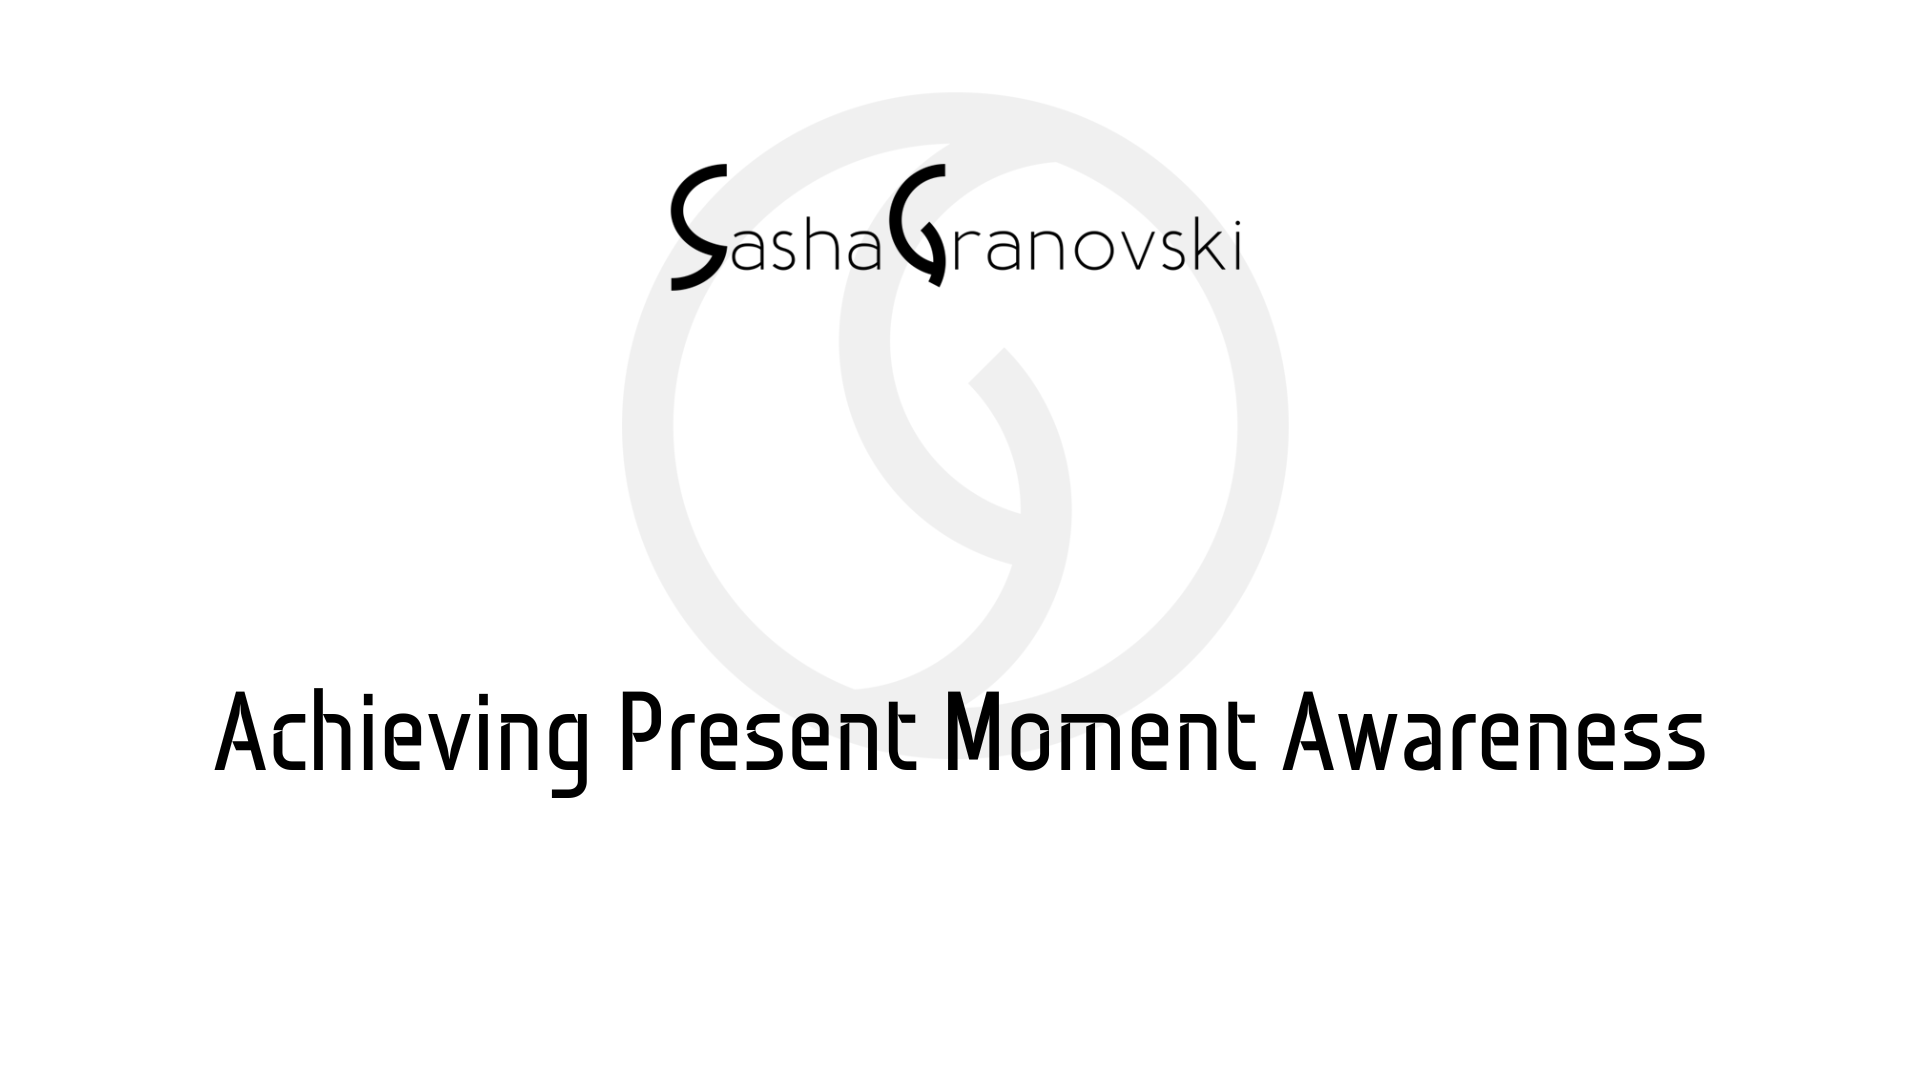 Achieving Present Moment Realization